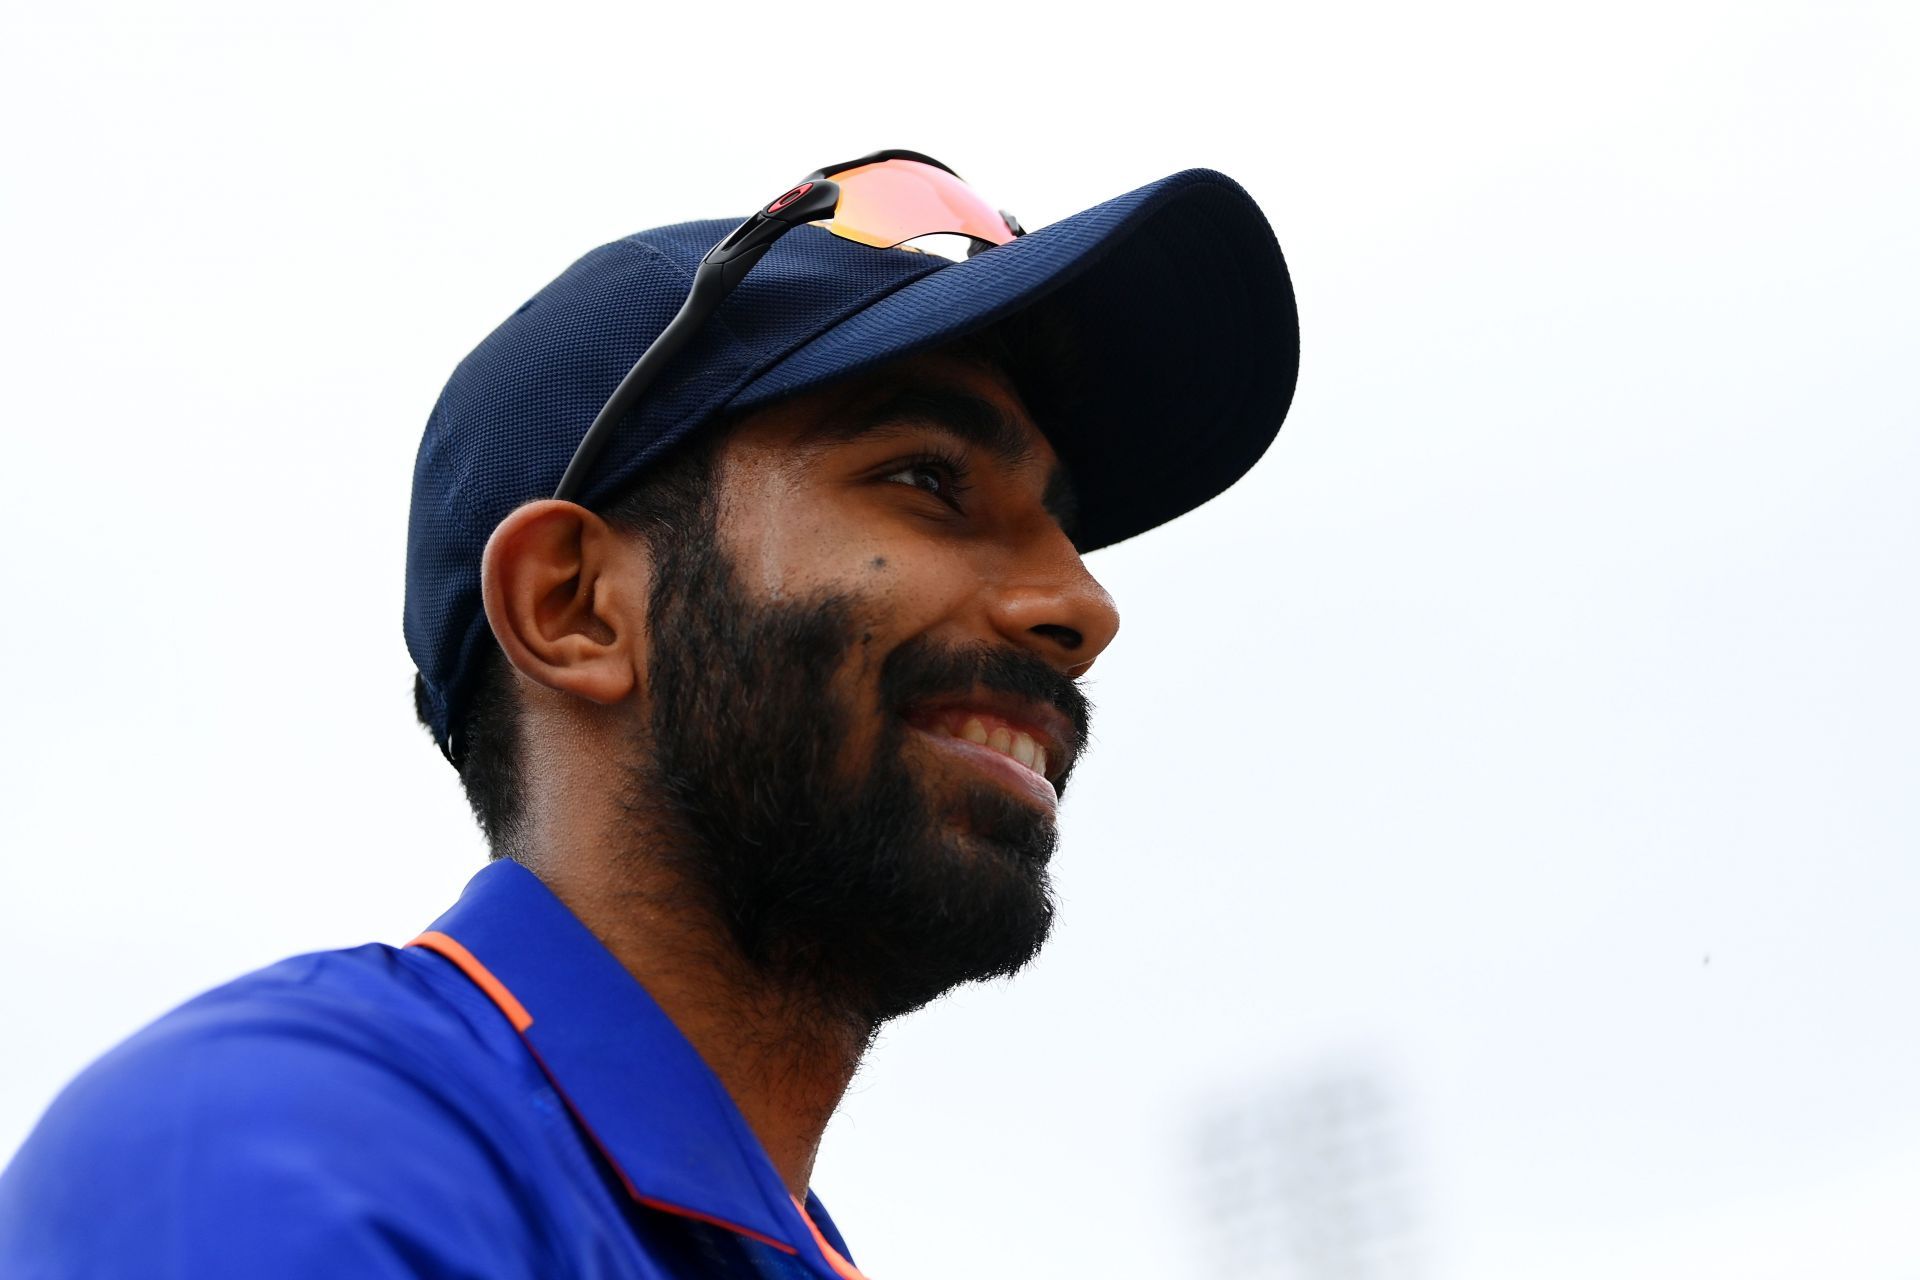 Jasprit Bumrah is regarded by many as the best bowler across formats